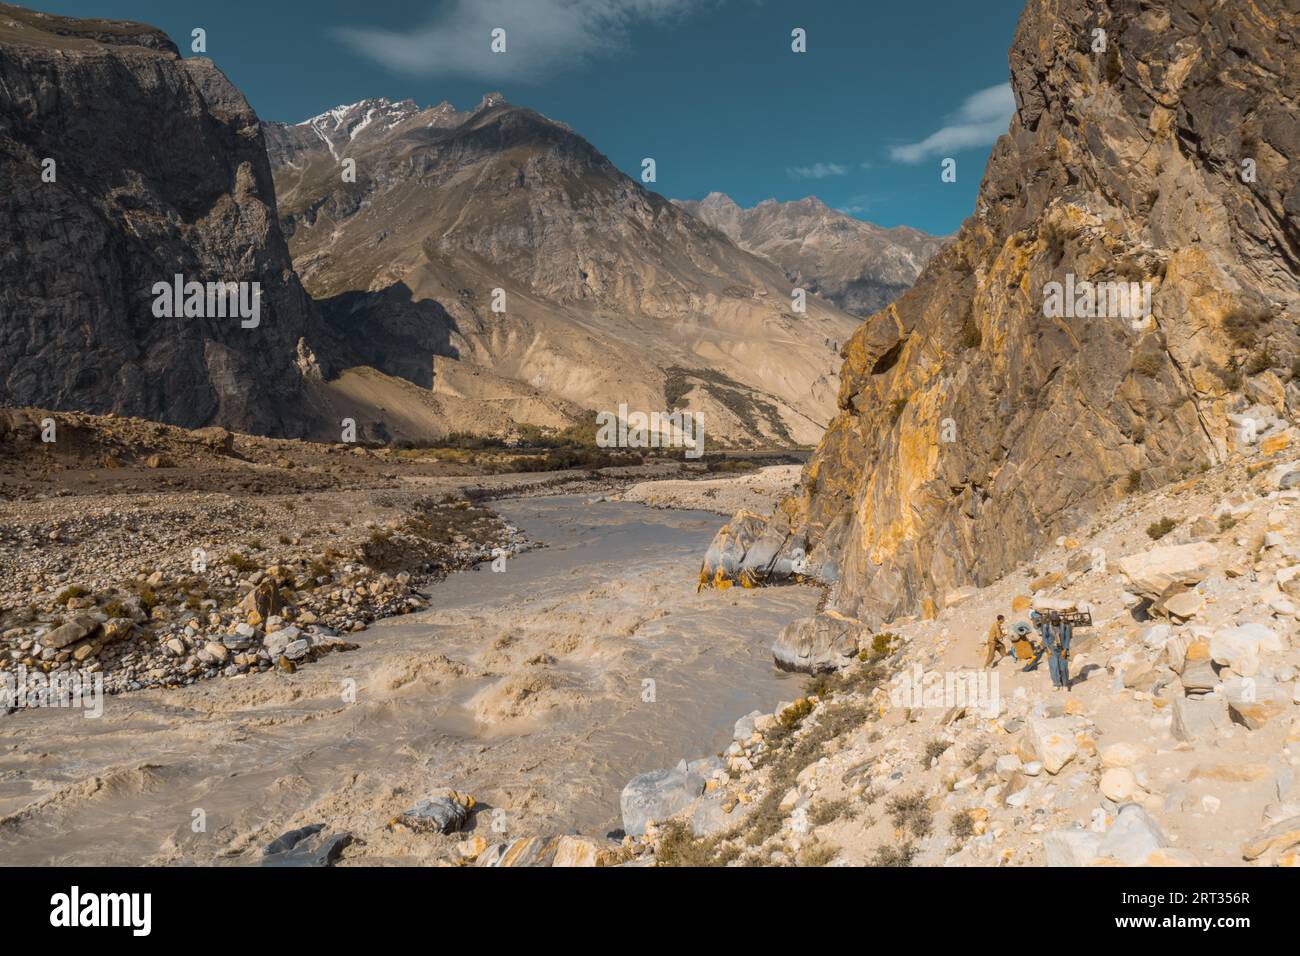 Picturesque valley with wild river in Karakoram Mountains in Pakistan Stock Photo